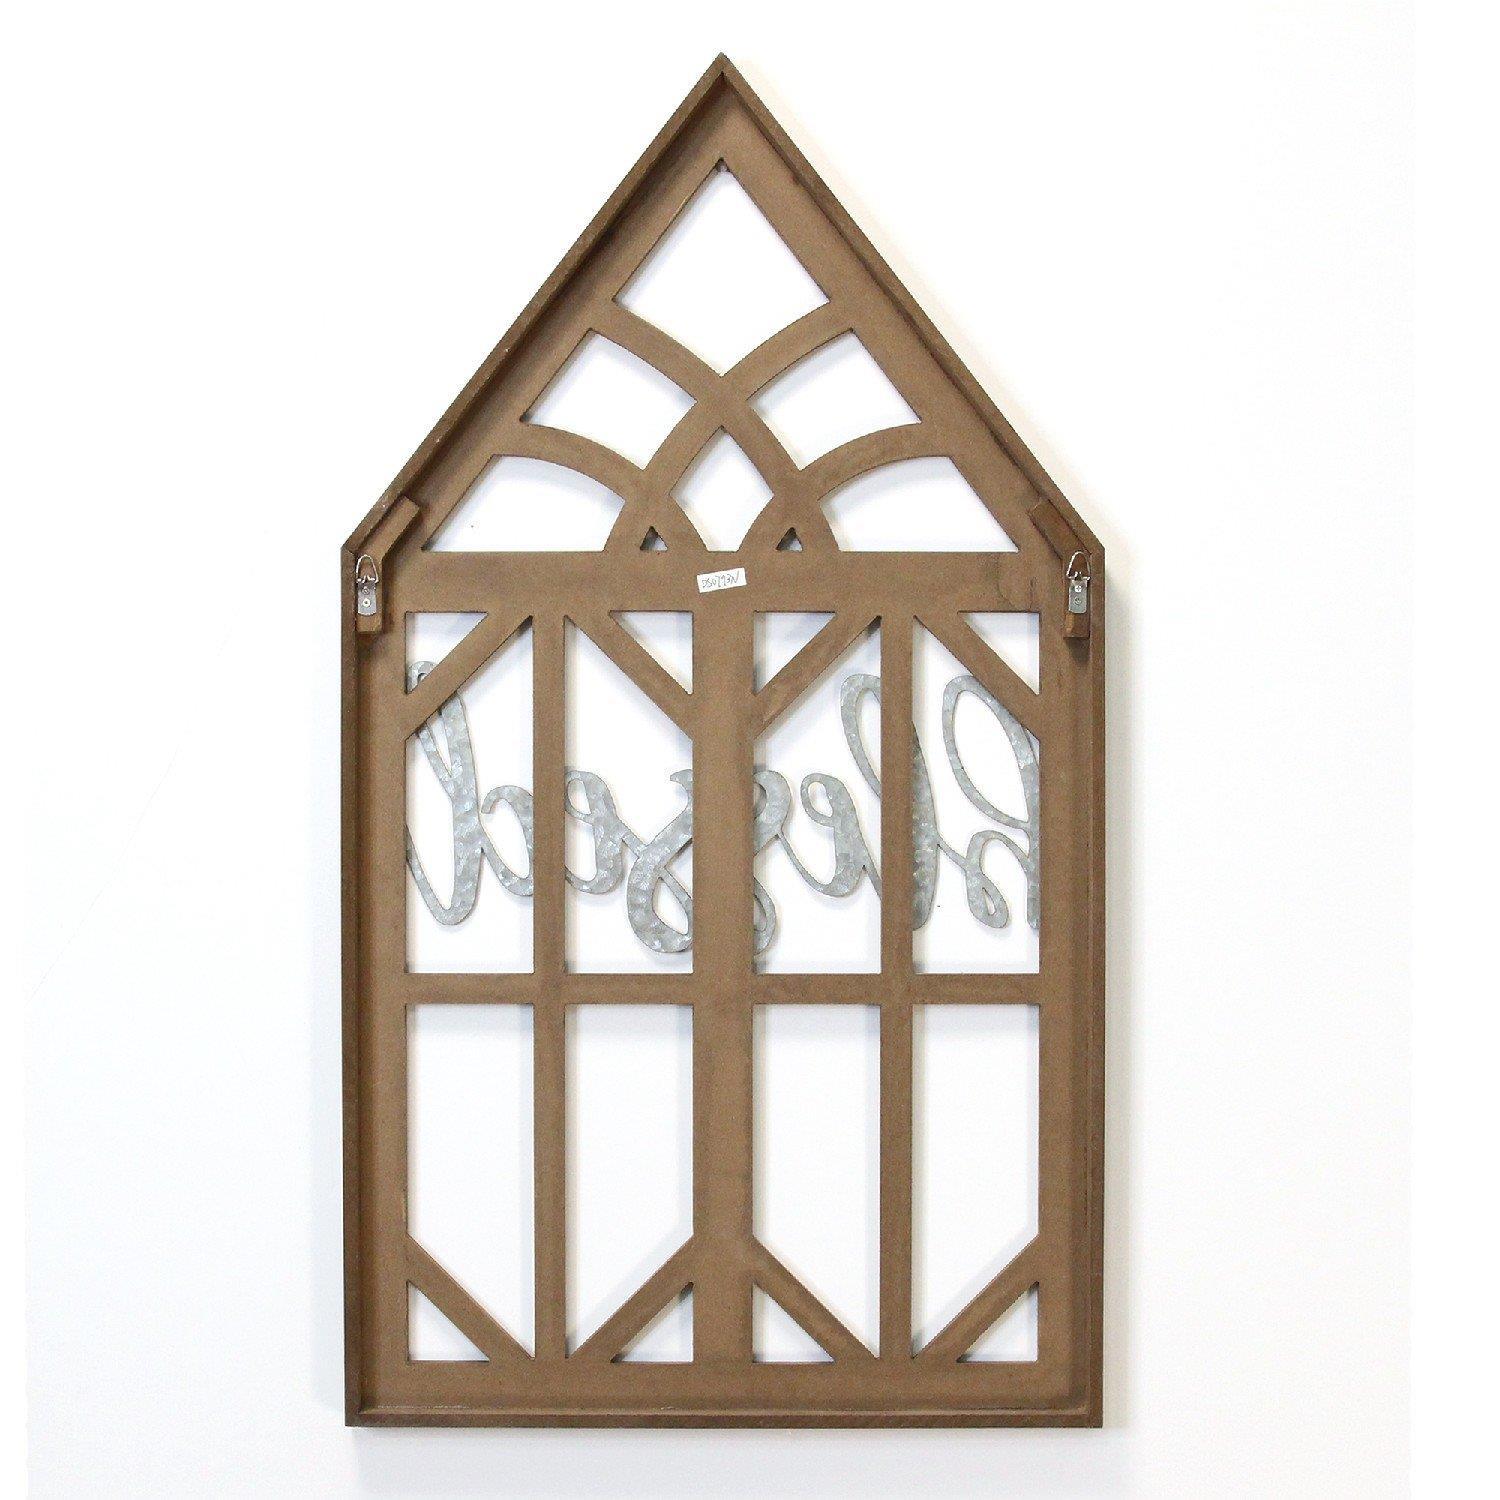 Stratton Home Decor Blessed Laser Cut Wood Window Frame Wall Decor S21060